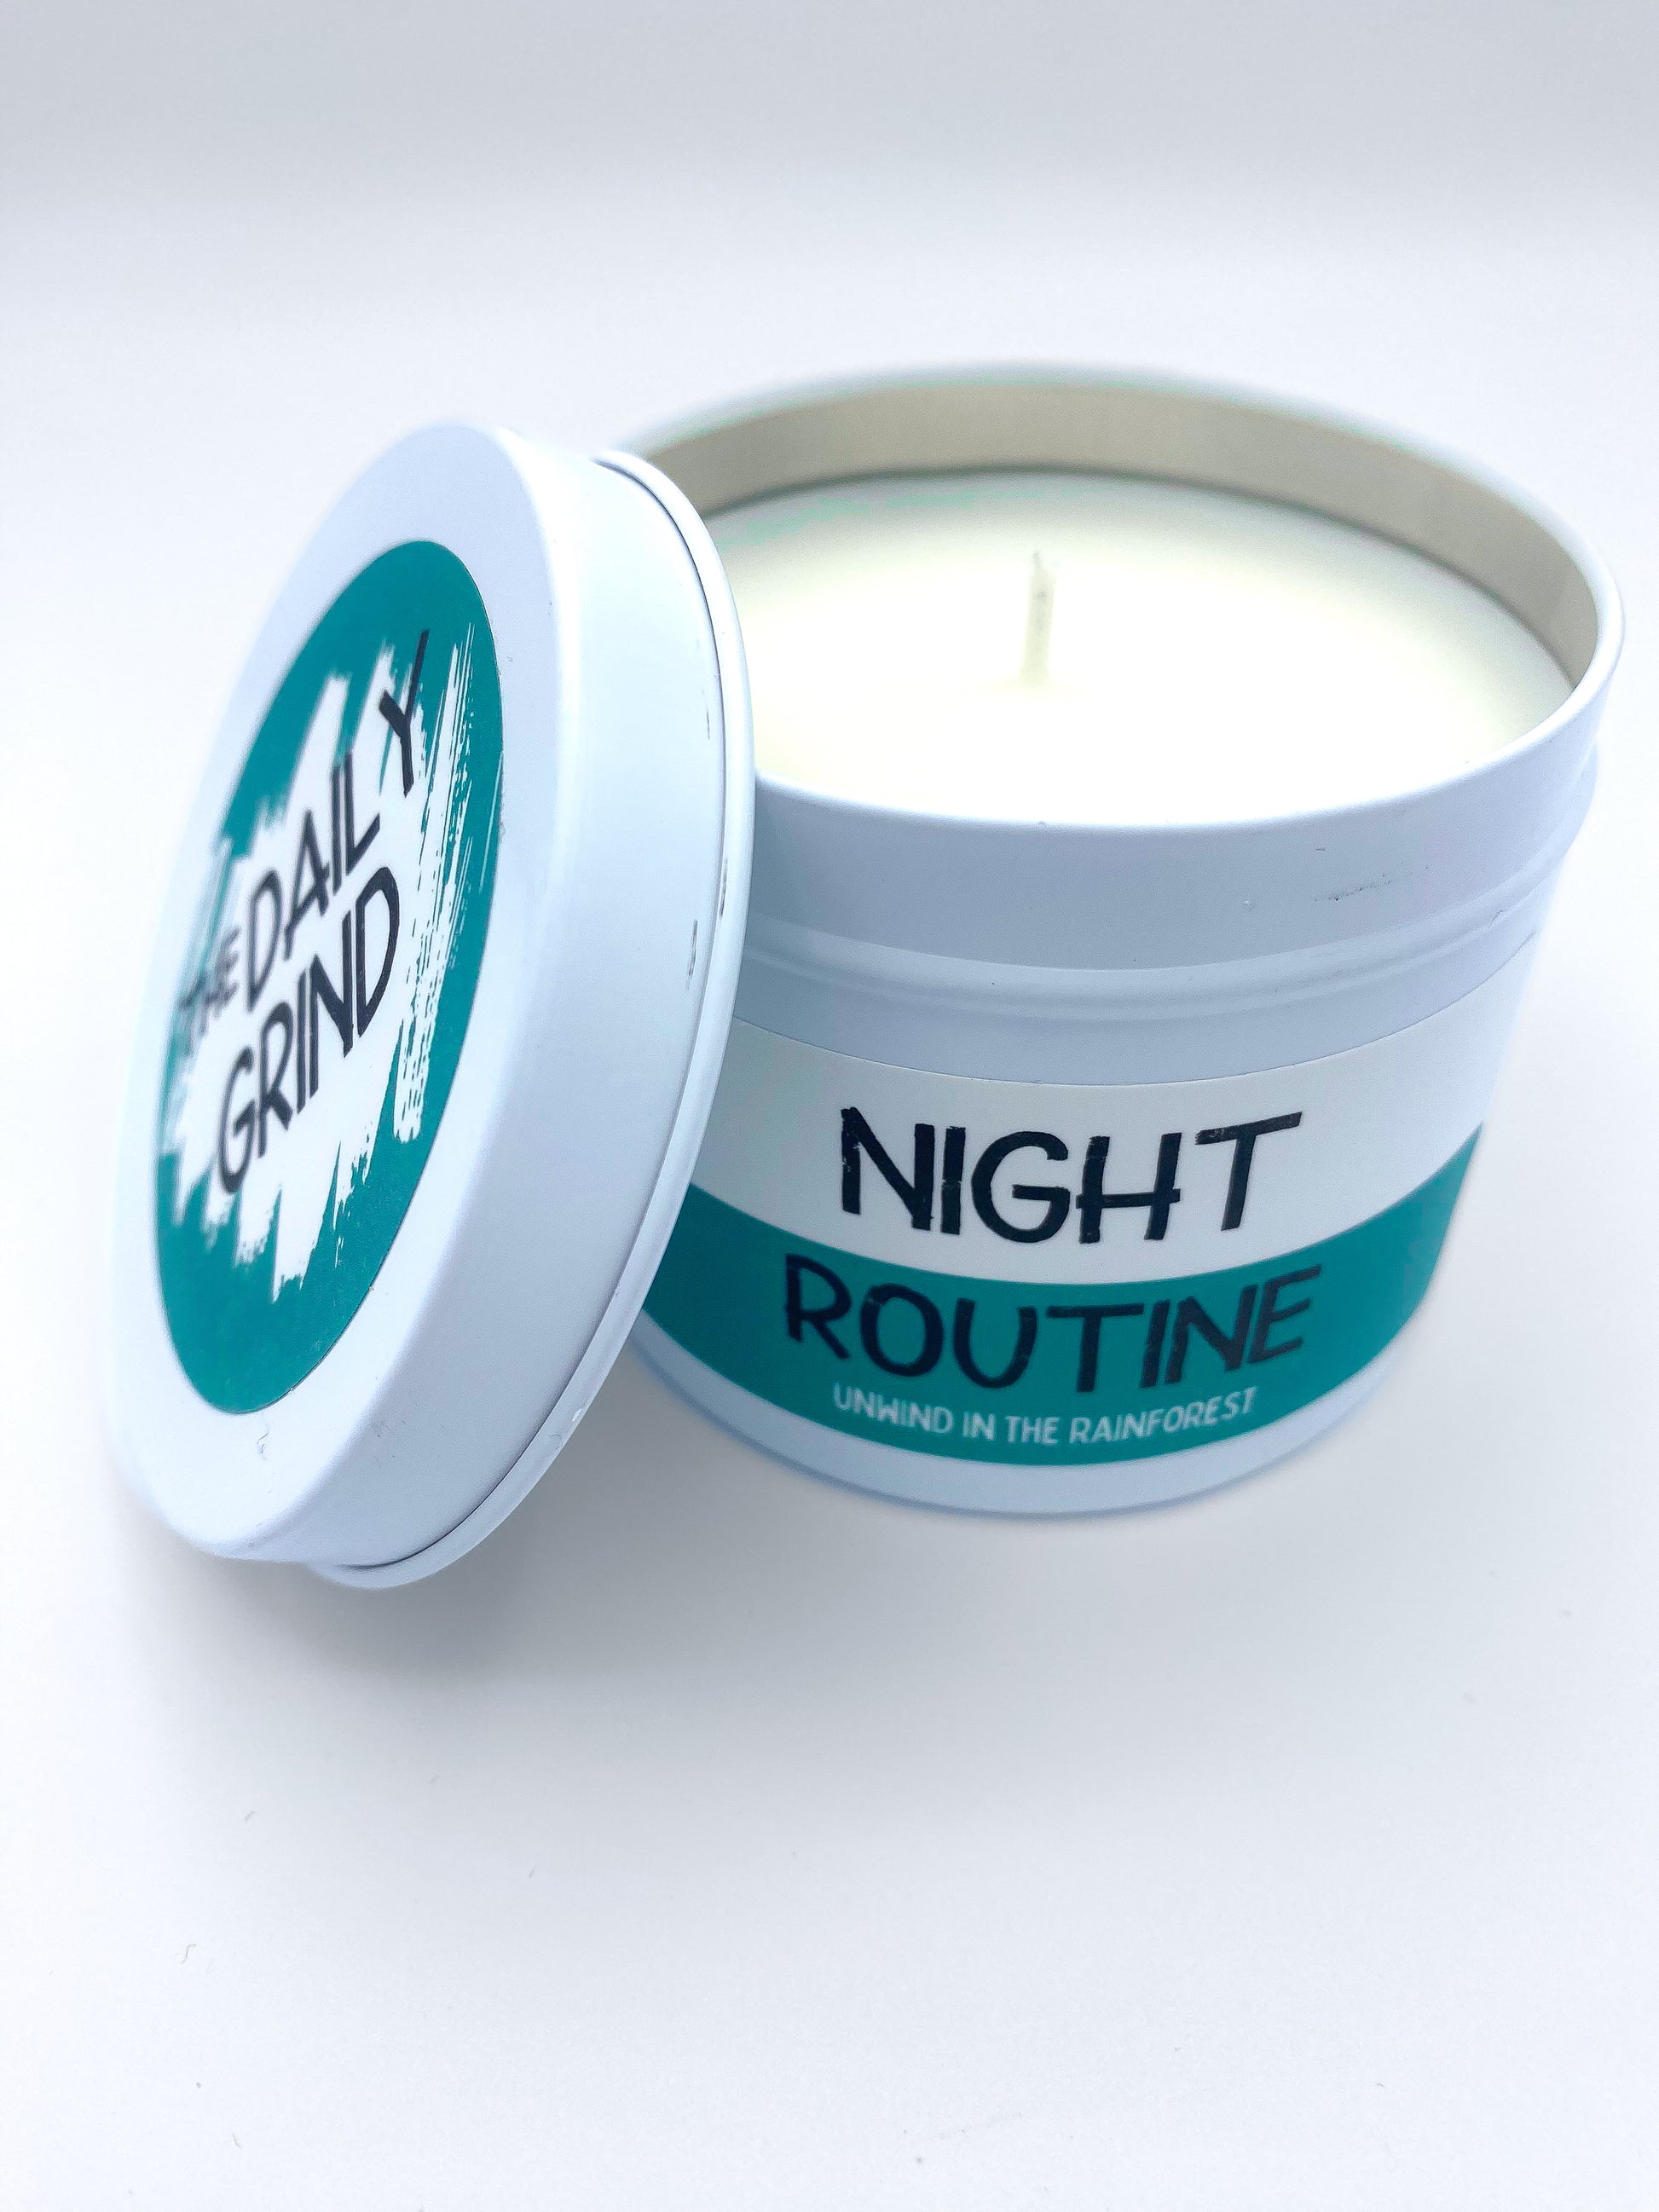 Unlit "Night Routine" candle in white tin